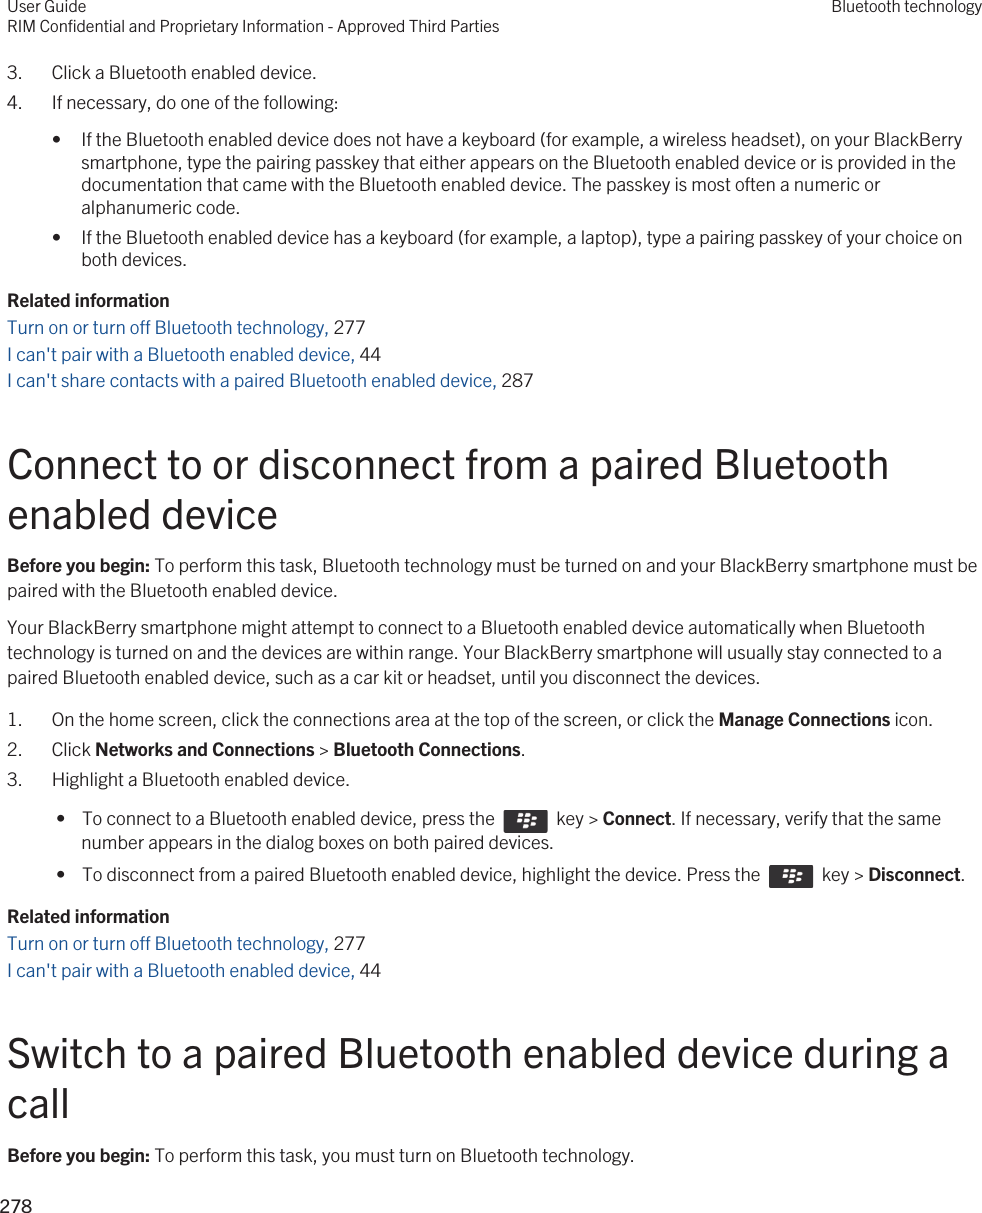 3. Click a Bluetooth enabled device.4. If necessary, do one of the following:• If the Bluetooth enabled device does not have a keyboard (for example, a wireless headset), on your BlackBerry smartphone, type the pairing passkey that either appears on the Bluetooth enabled device or is provided in the documentation that came with the Bluetooth enabled device. The passkey is most often a numeric or alphanumeric code.• If the Bluetooth enabled device has a keyboard (for example, a laptop), type a pairing passkey of your choice on both devices.Related informationTurn on or turn off Bluetooth technology, 277 I can&apos;t pair with a Bluetooth enabled device, 44 I can&apos;t share contacts with a paired Bluetooth enabled device, 287Connect to or disconnect from a paired Bluetooth enabled deviceBefore you begin: To perform this task, Bluetooth technology must be turned on and your BlackBerry smartphone must be paired with the Bluetooth enabled device.Your BlackBerry smartphone might attempt to connect to a Bluetooth enabled device automatically when Bluetooth technology is turned on and the devices are within range. Your BlackBerry smartphone will usually stay connected to a paired Bluetooth enabled device, such as a car kit or headset, until you disconnect the devices.1. On the home screen, click the connections area at the top of the screen, or click the Manage Connections icon.2. Click Networks and Connections &gt; Bluetooth Connections.3. Highlight a Bluetooth enabled device. •  To connect to a Bluetooth enabled device, press the    key &gt; Connect. If necessary, verify that the same number appears in the dialog boxes on both paired devices. •  To disconnect from a paired Bluetooth enabled device, highlight the device. Press the    key &gt; Disconnect.Related informationTurn on or turn off Bluetooth technology, 277 I can&apos;t pair with a Bluetooth enabled device, 44 Switch to a paired Bluetooth enabled device during a callBefore you begin: To perform this task, you must turn on Bluetooth technology.User GuideRIM Confidential and Proprietary Information - Approved Third PartiesBluetooth technology278 